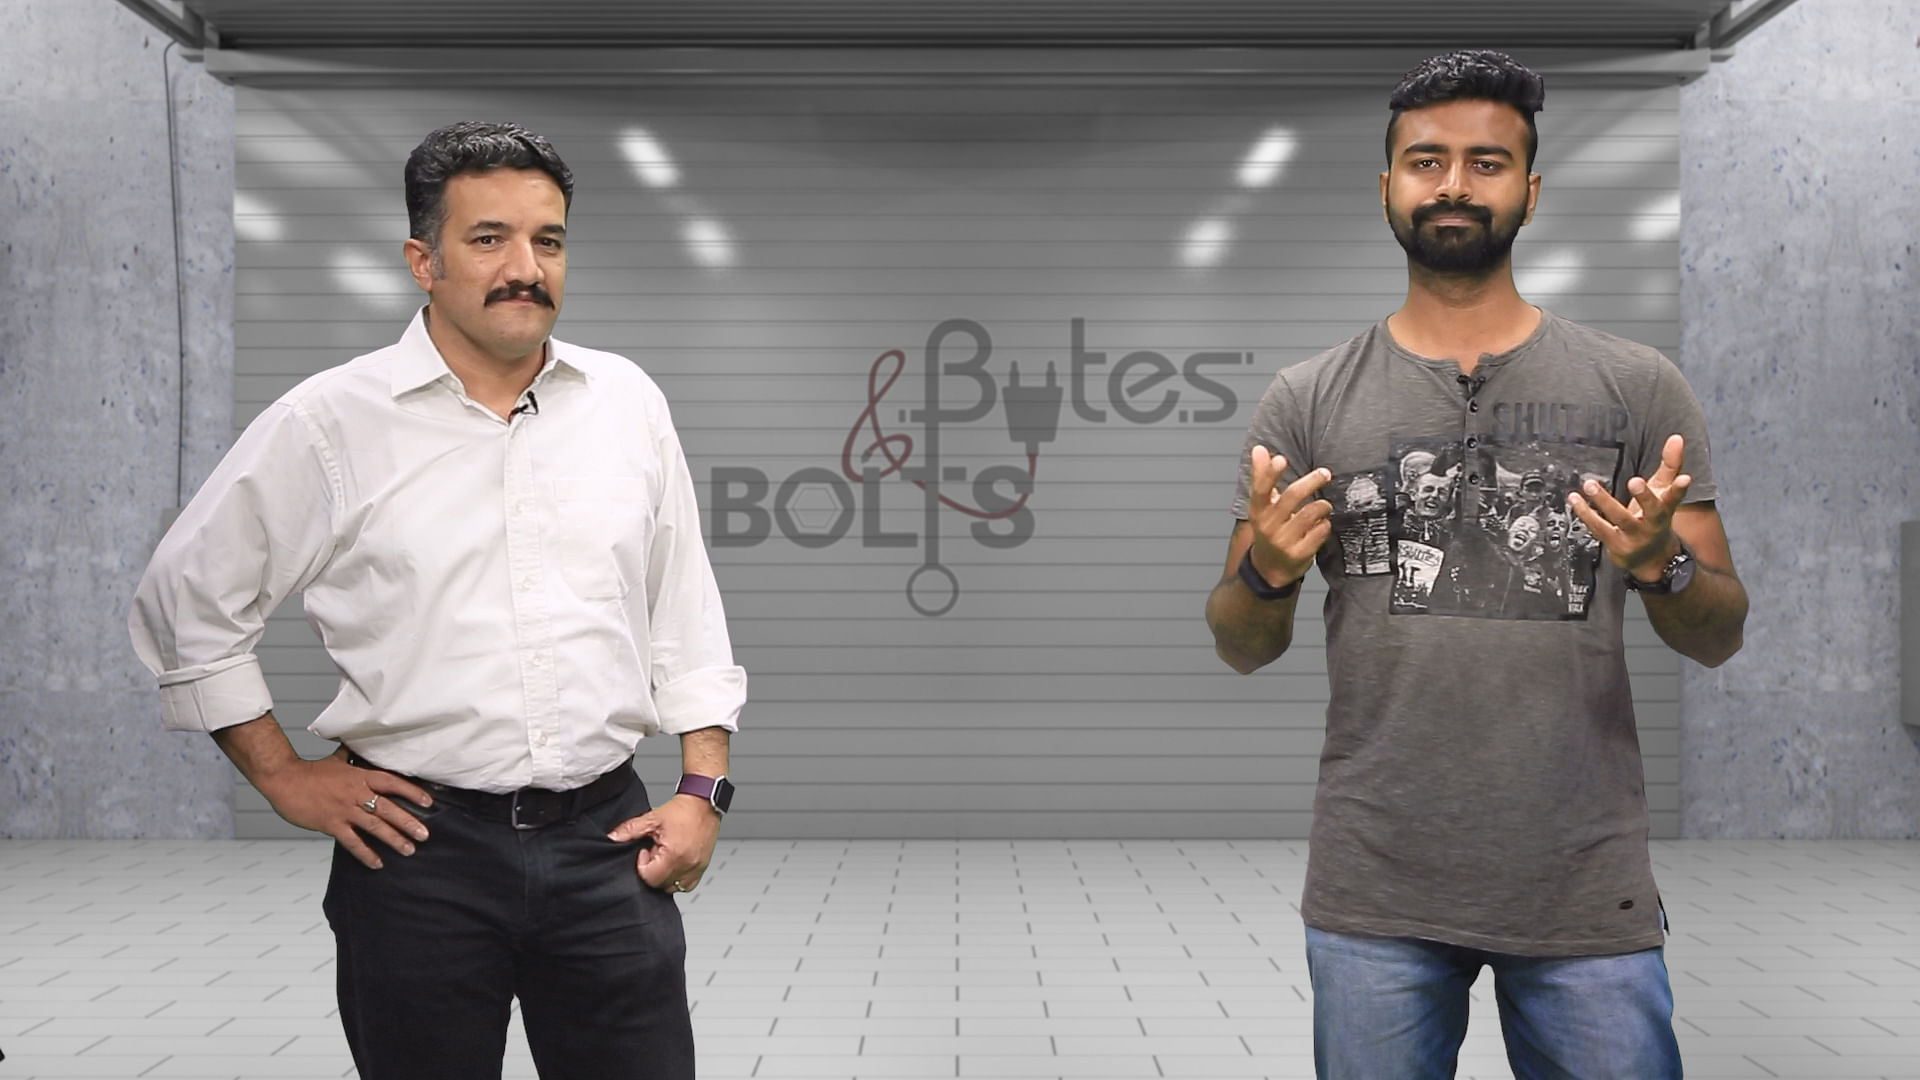 Bytes &amp; Bolts is The Quint’s take on the world of technology and automobiles.&nbsp;